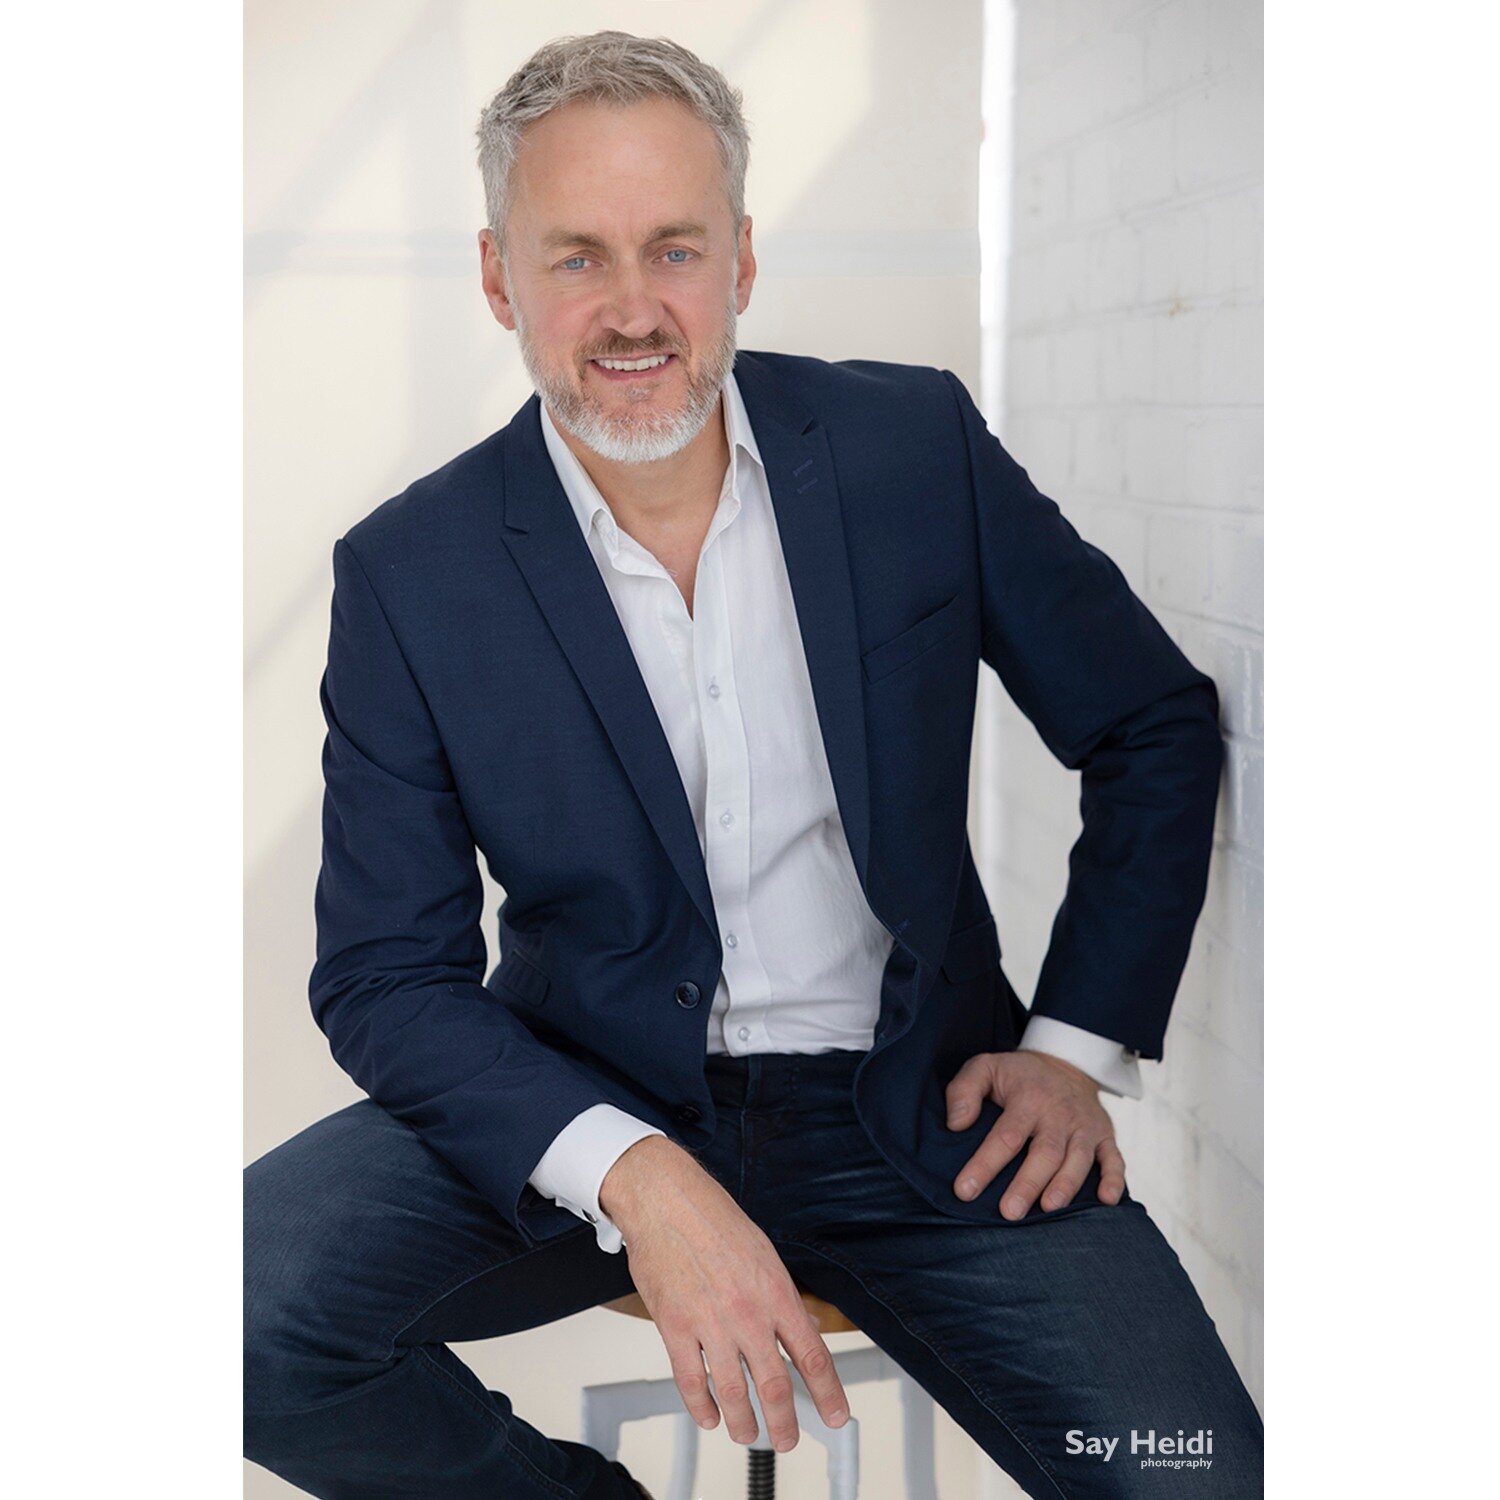 Some of my headshot clients could easily do some silverfox modelling...

#silverfoxmanagement #silverfoxmodel #moorabbin #melbournephotographer #melbourneheadshotsphotographer #melbourneheadshots